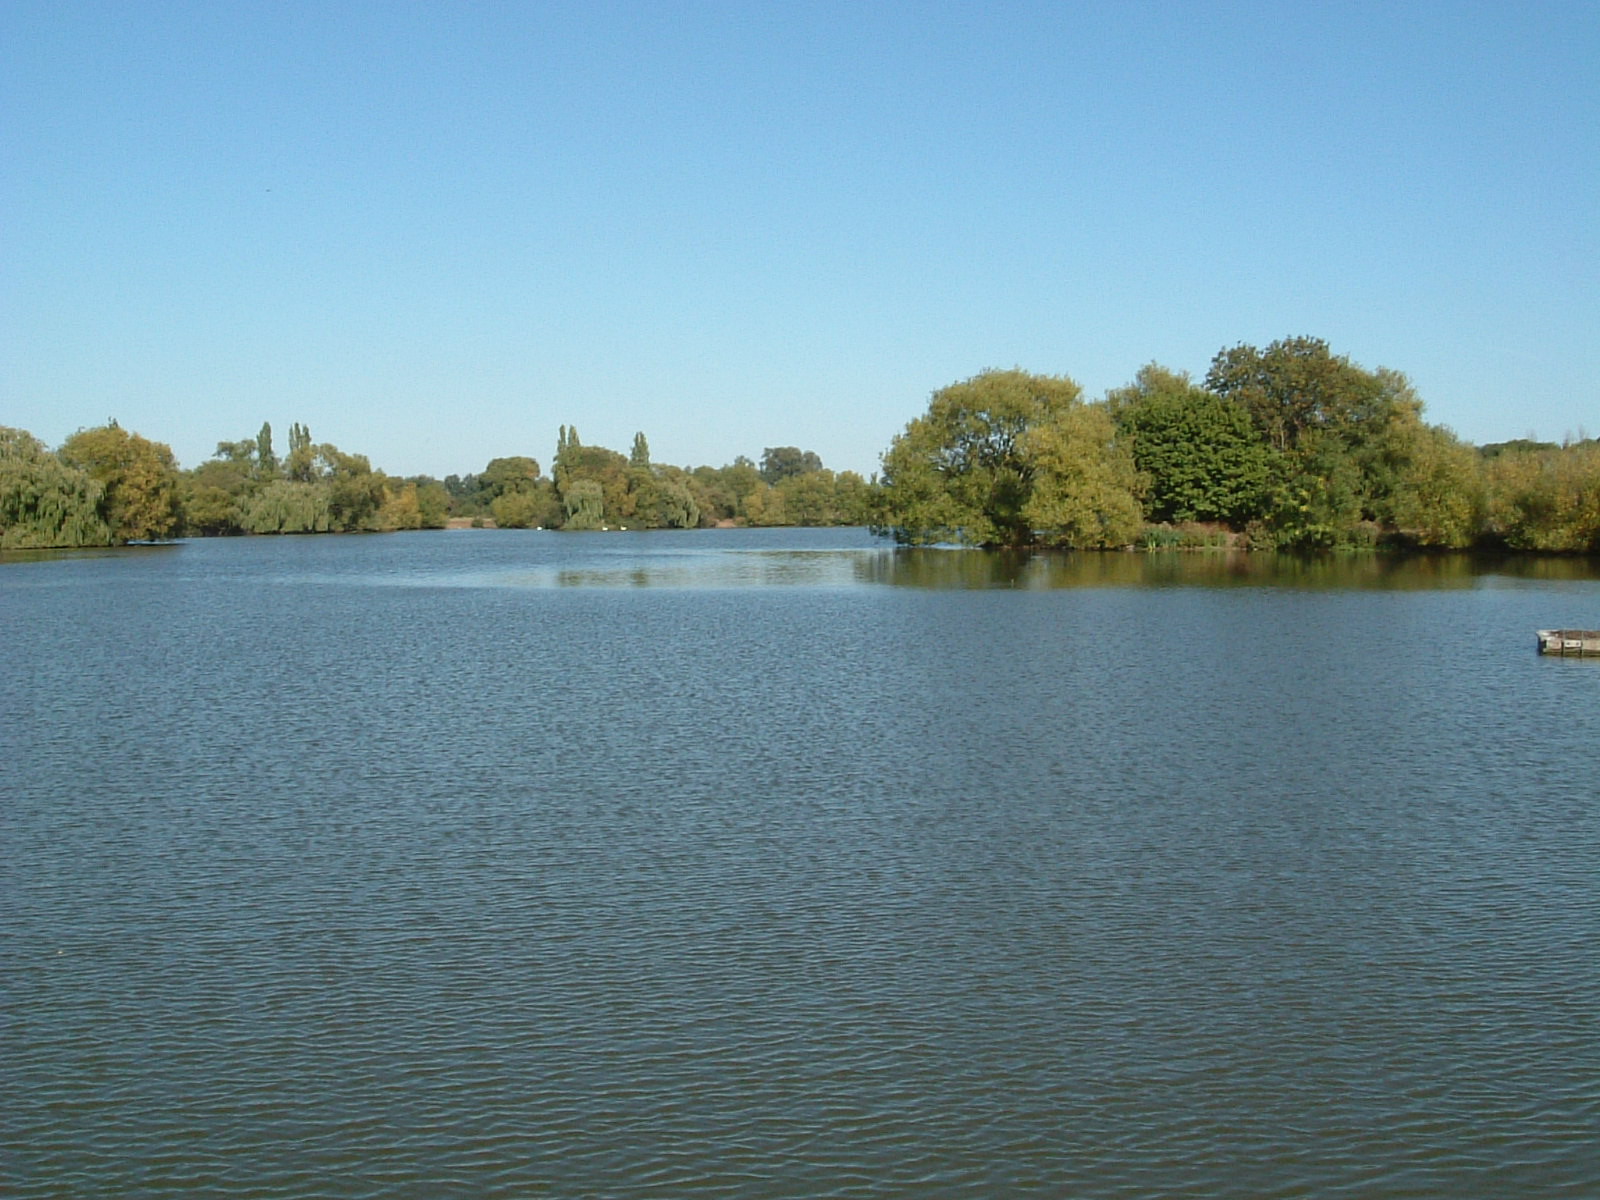 A lake nect to the River Roding